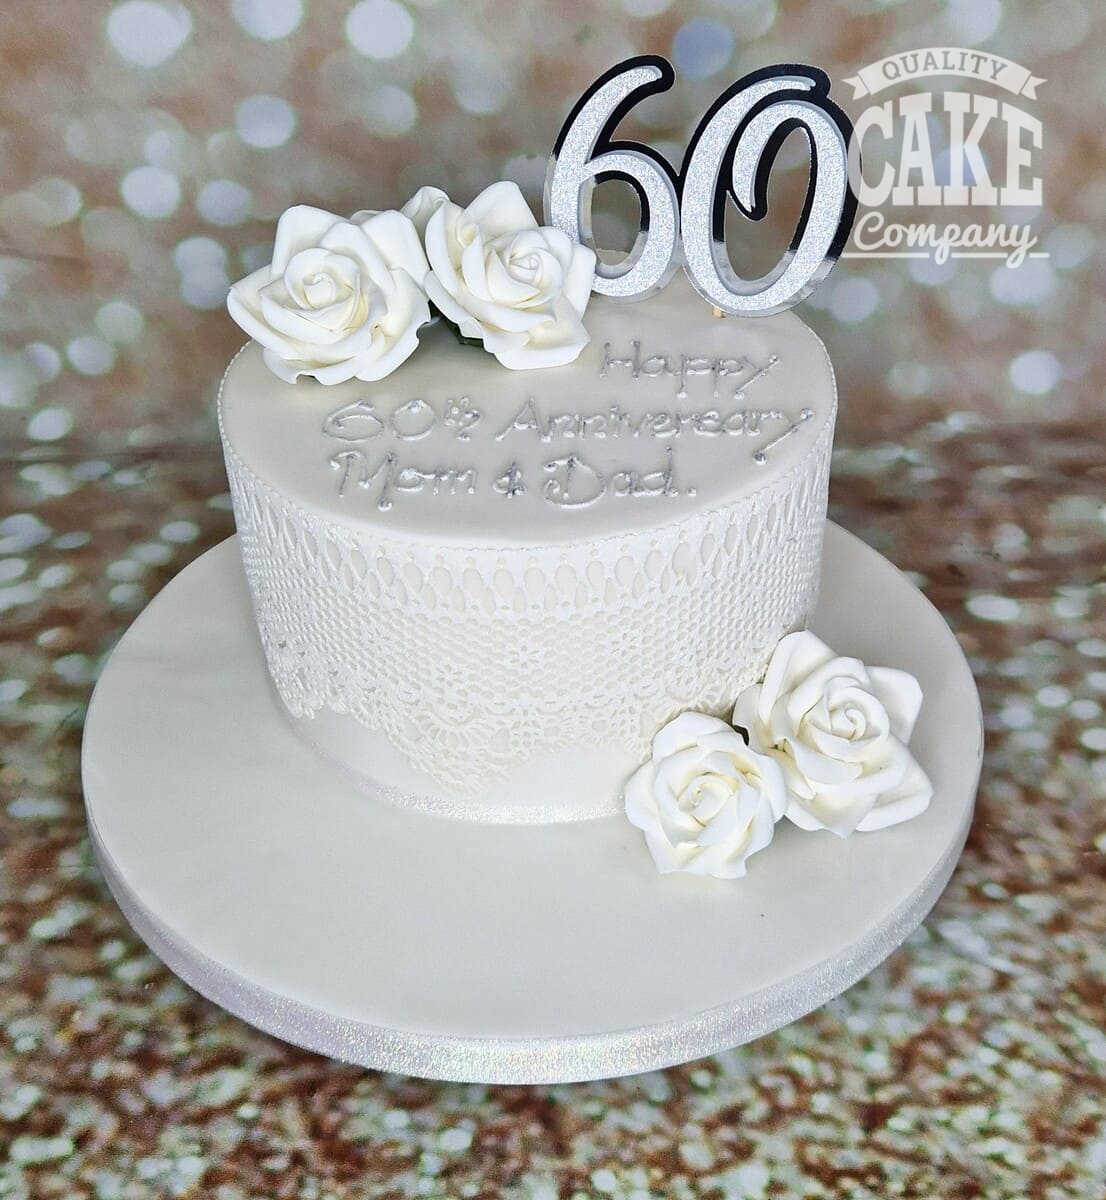 My Simple Flowers Cake for 50th Wedding Anniversary 💕 : r/cakedecorating